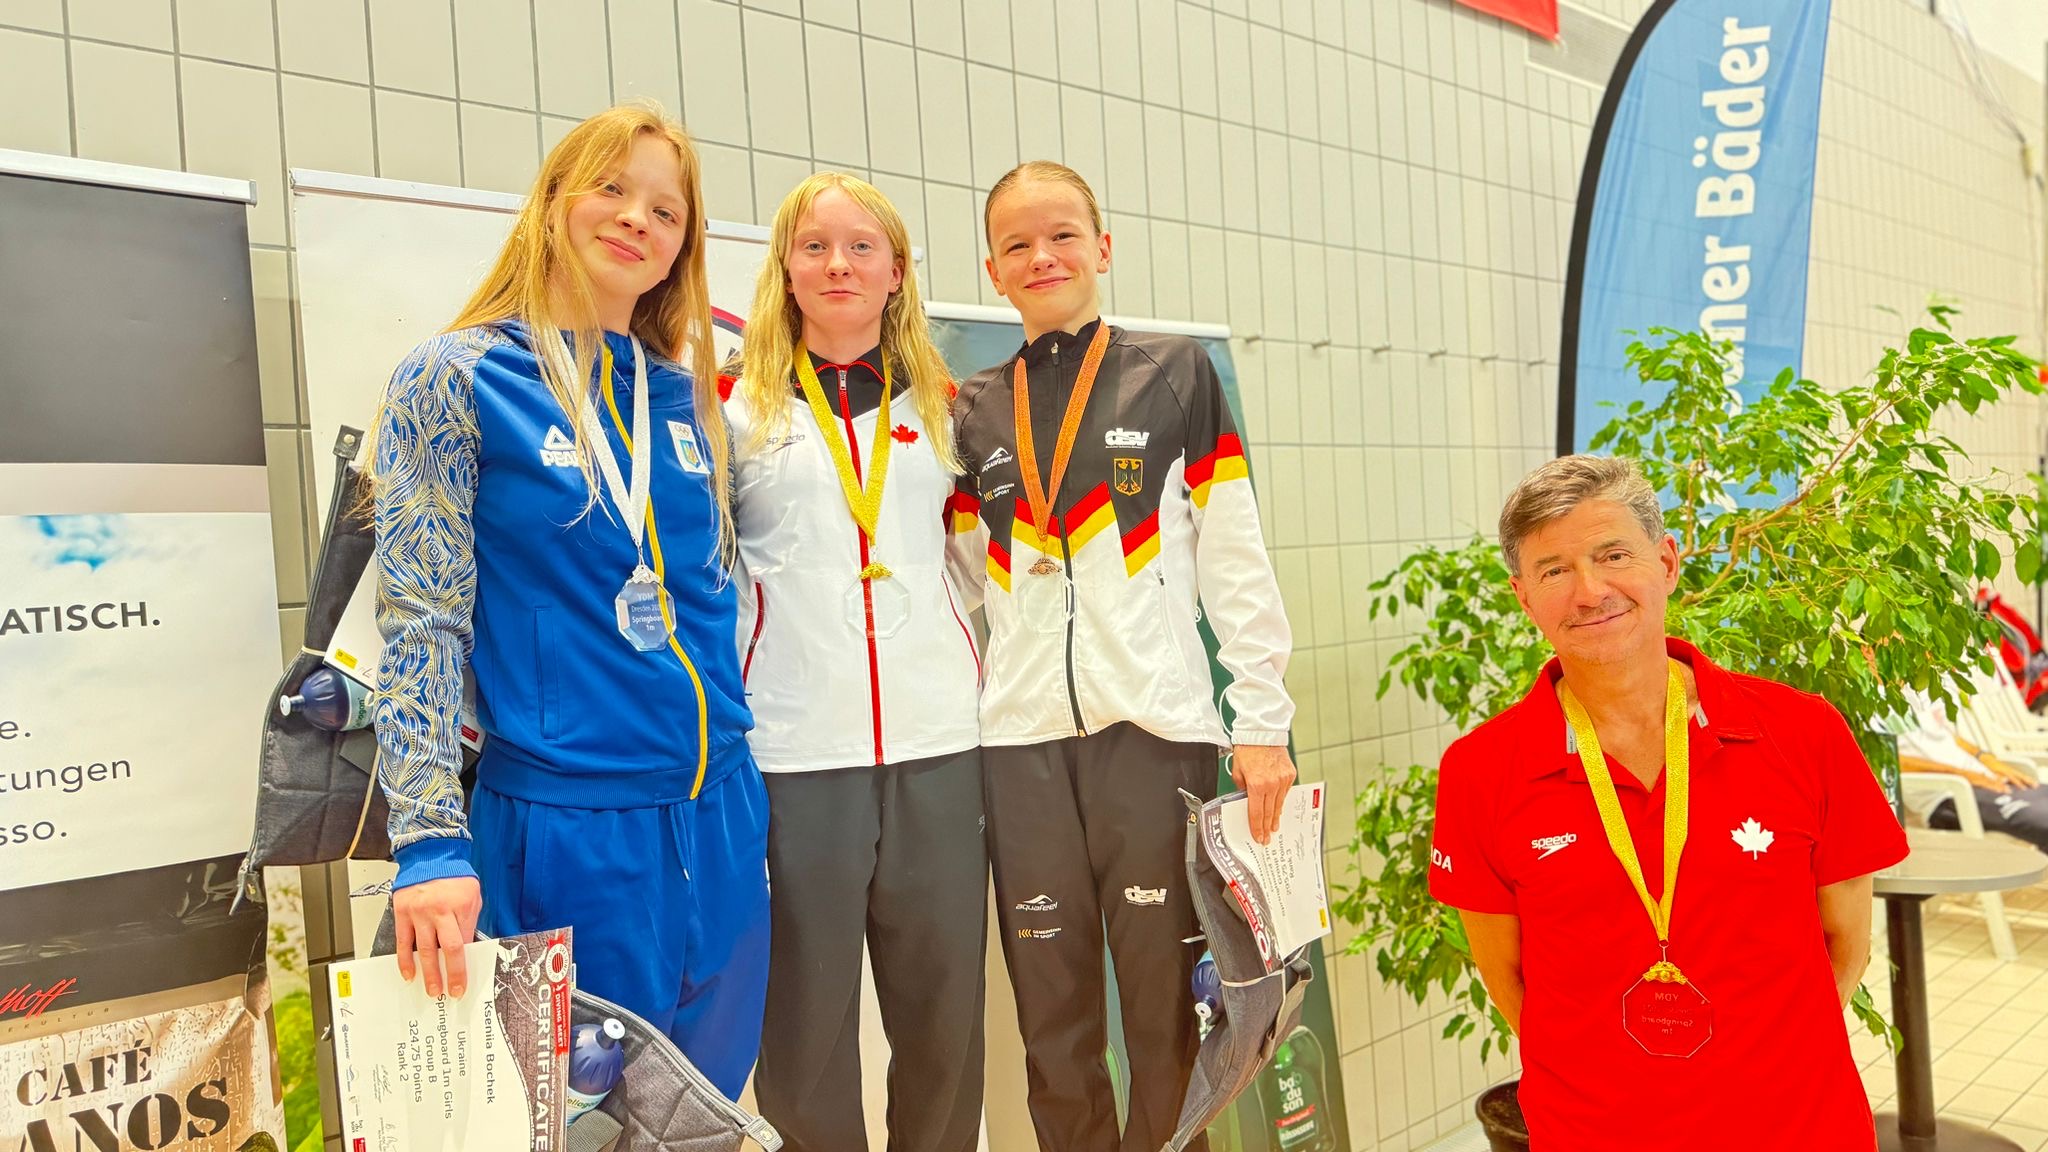 Two podium finishes for Canada: Lila Gokiert in gold, Mathilde Laberge in silver